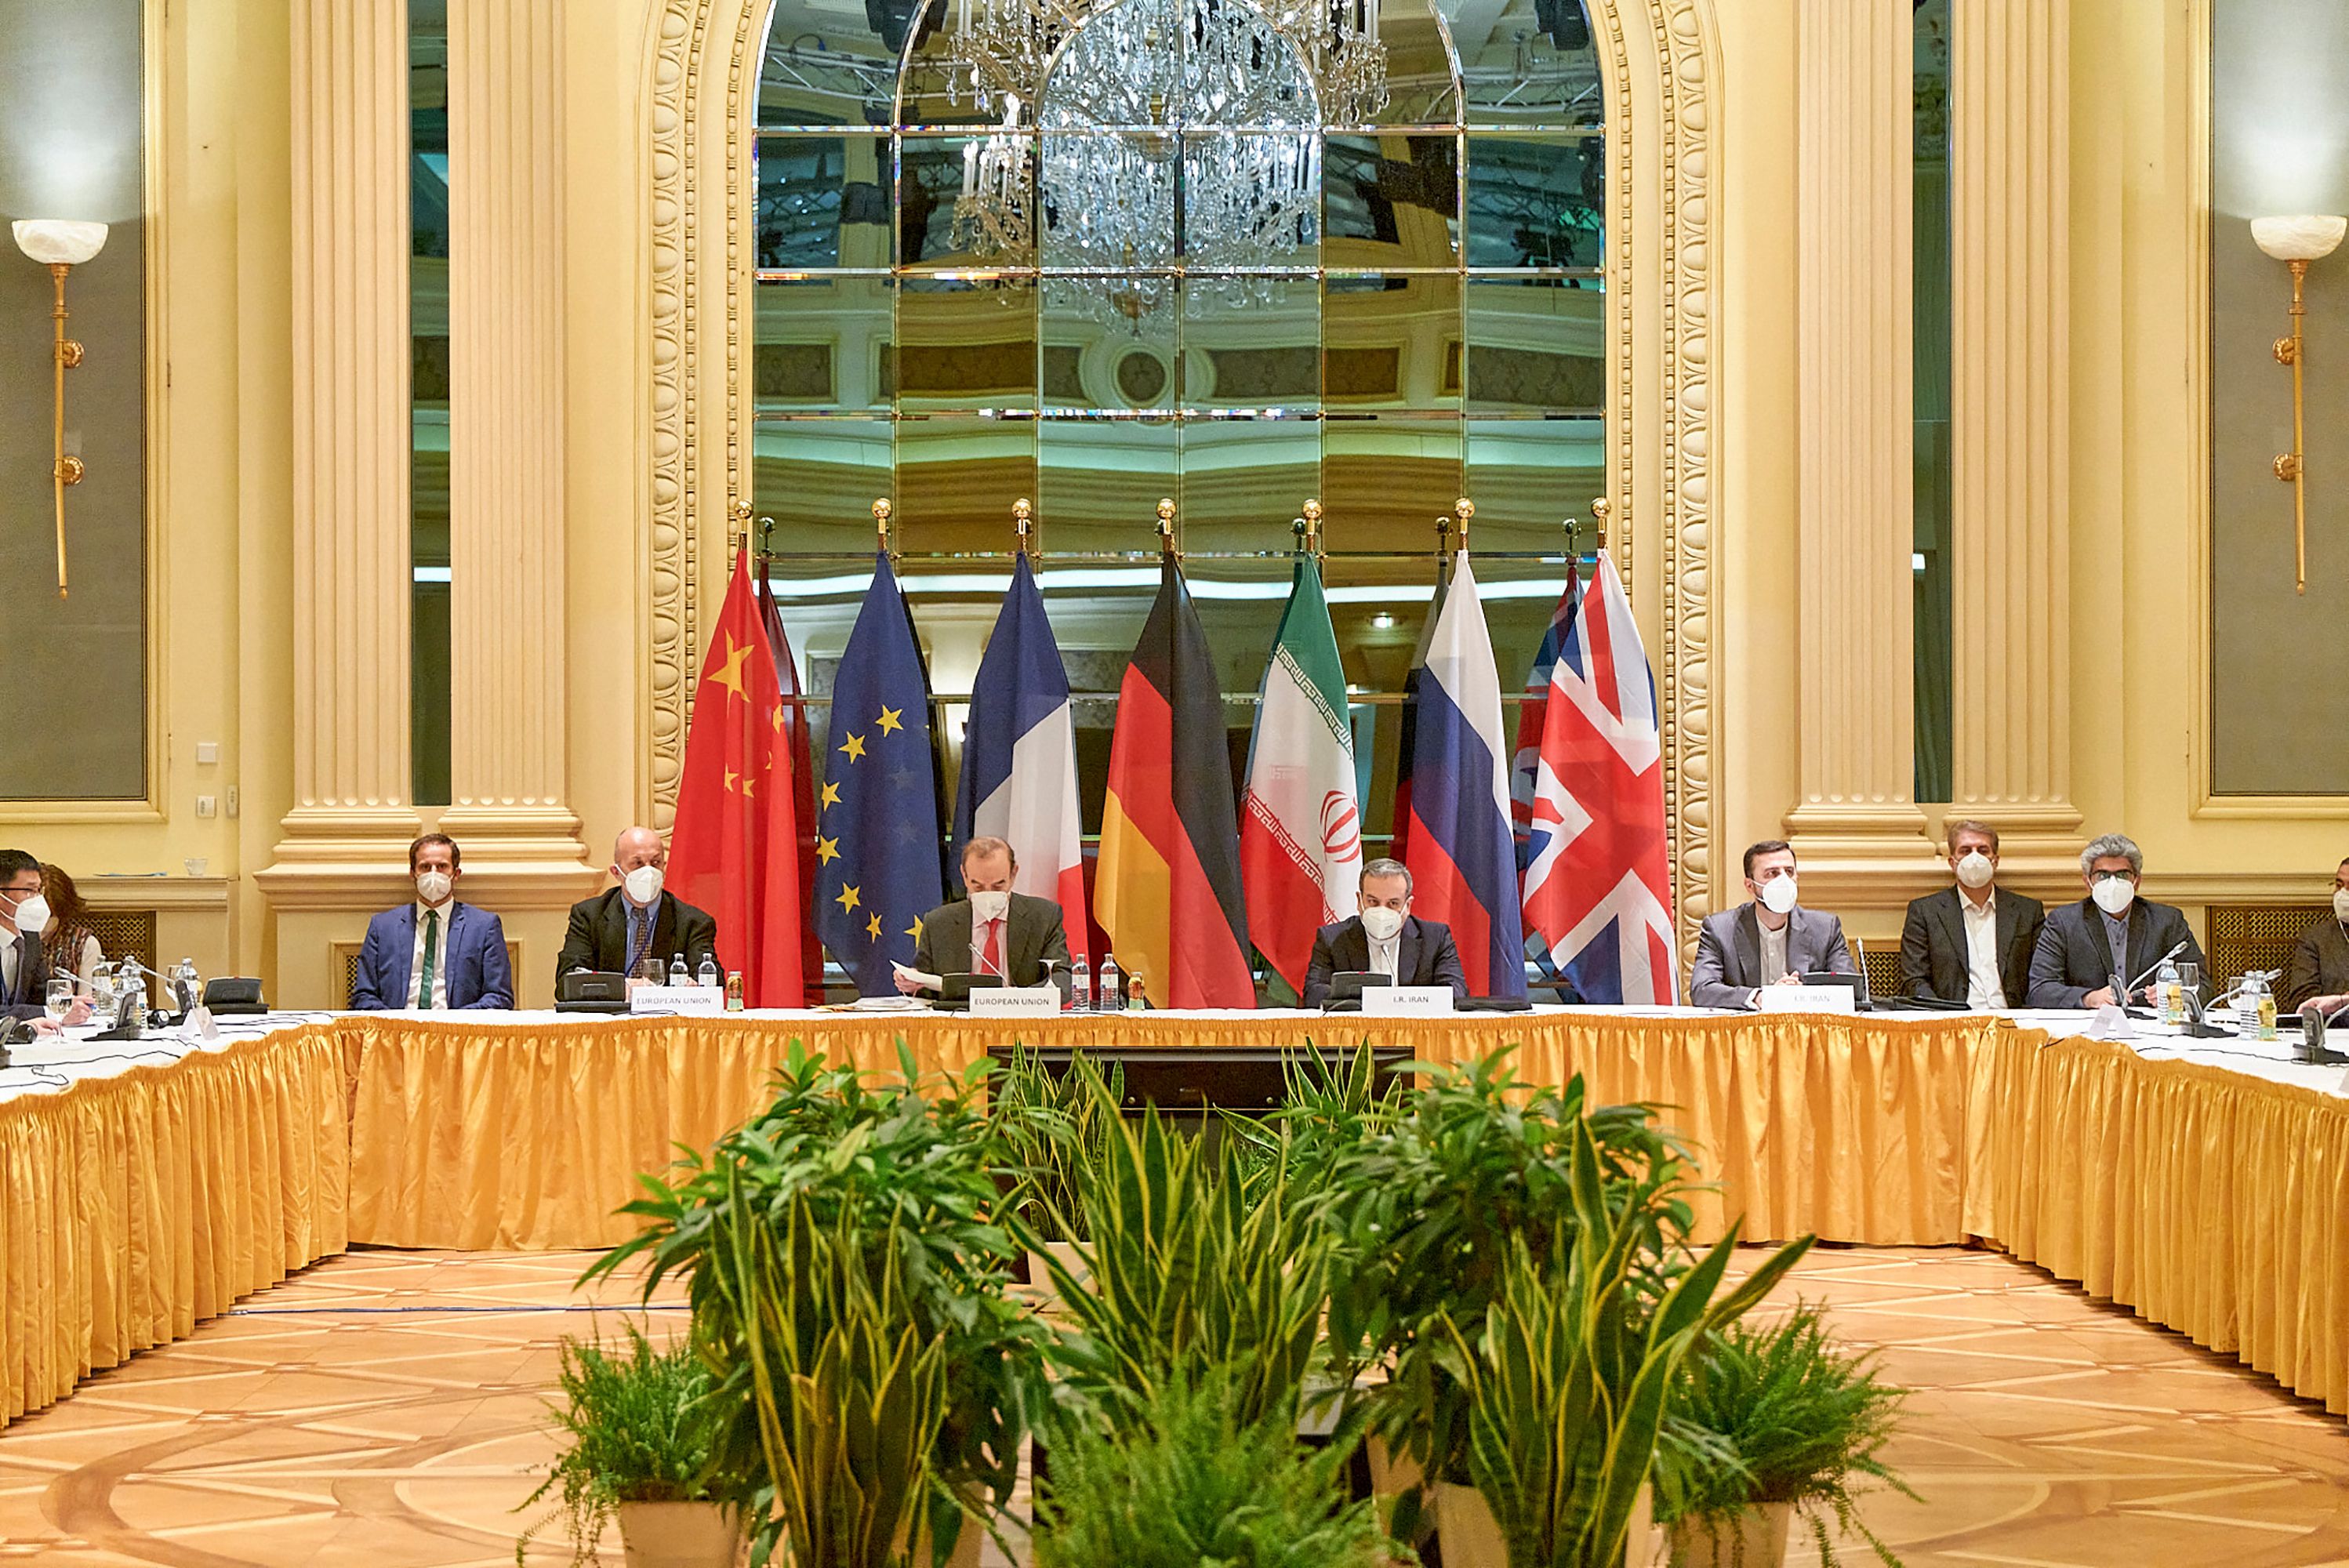 Delegates from the parties to the Iran nuclear deal – Germany, France, Britain, China, Russia and Iran –attend a meeting at the Grand Hotel of Vienna